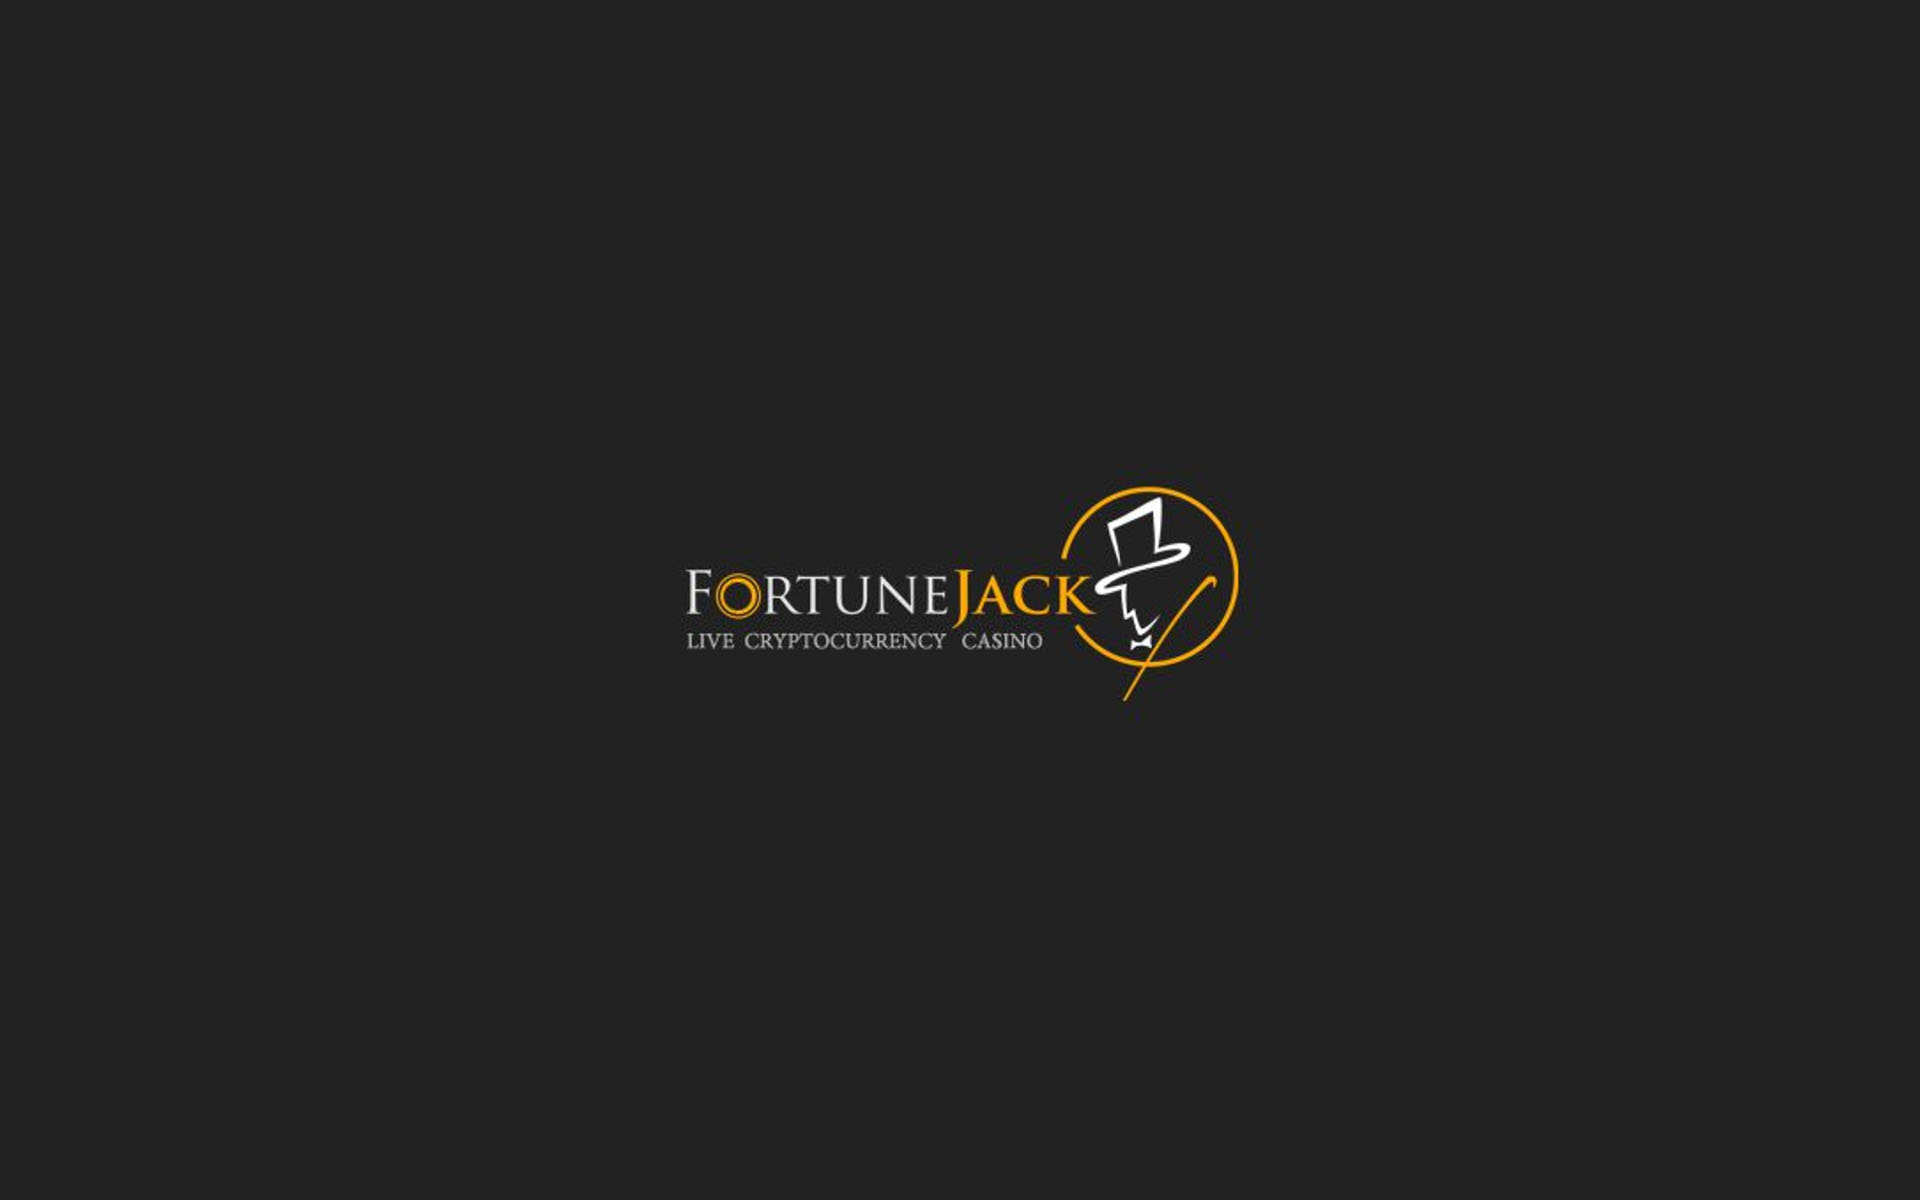 FortuneJack Boasts More Than 500 Games On Its Site